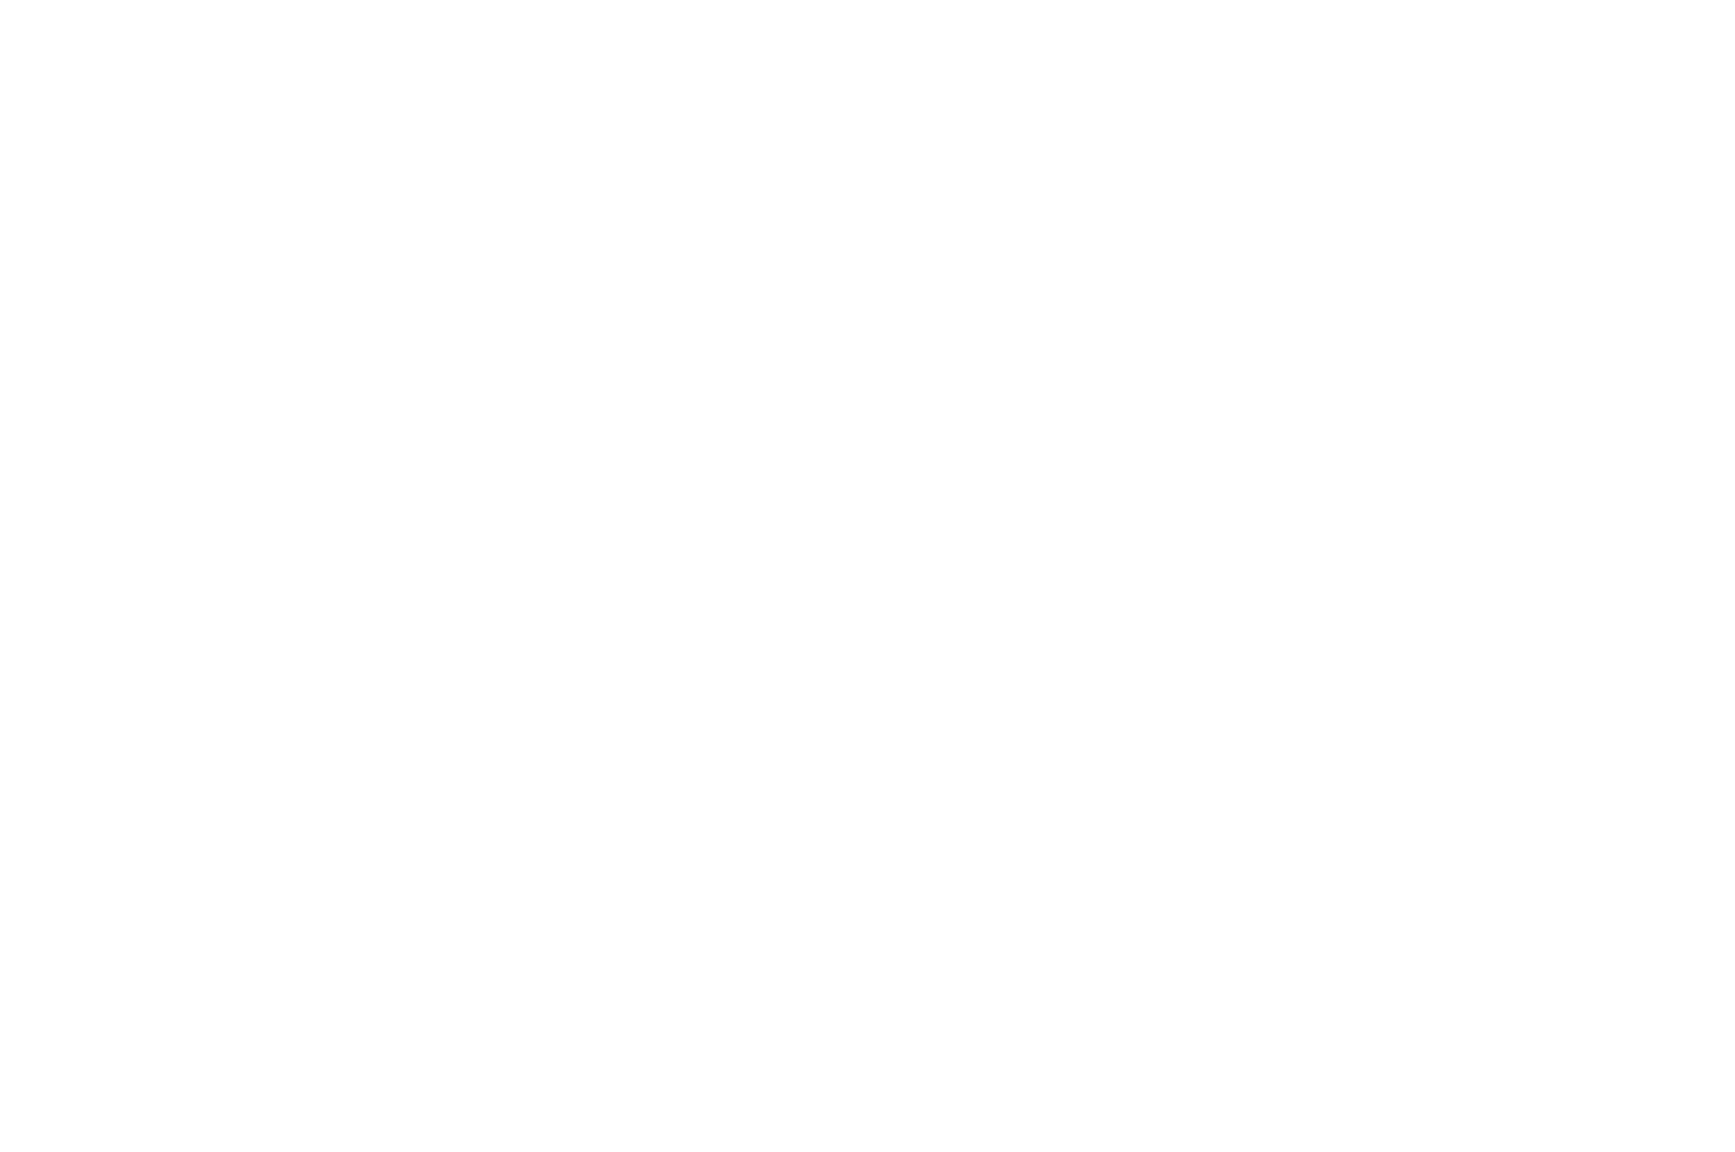 OFFICIAL SELECTION - NEW YORK SUN FEST  - 2017.png